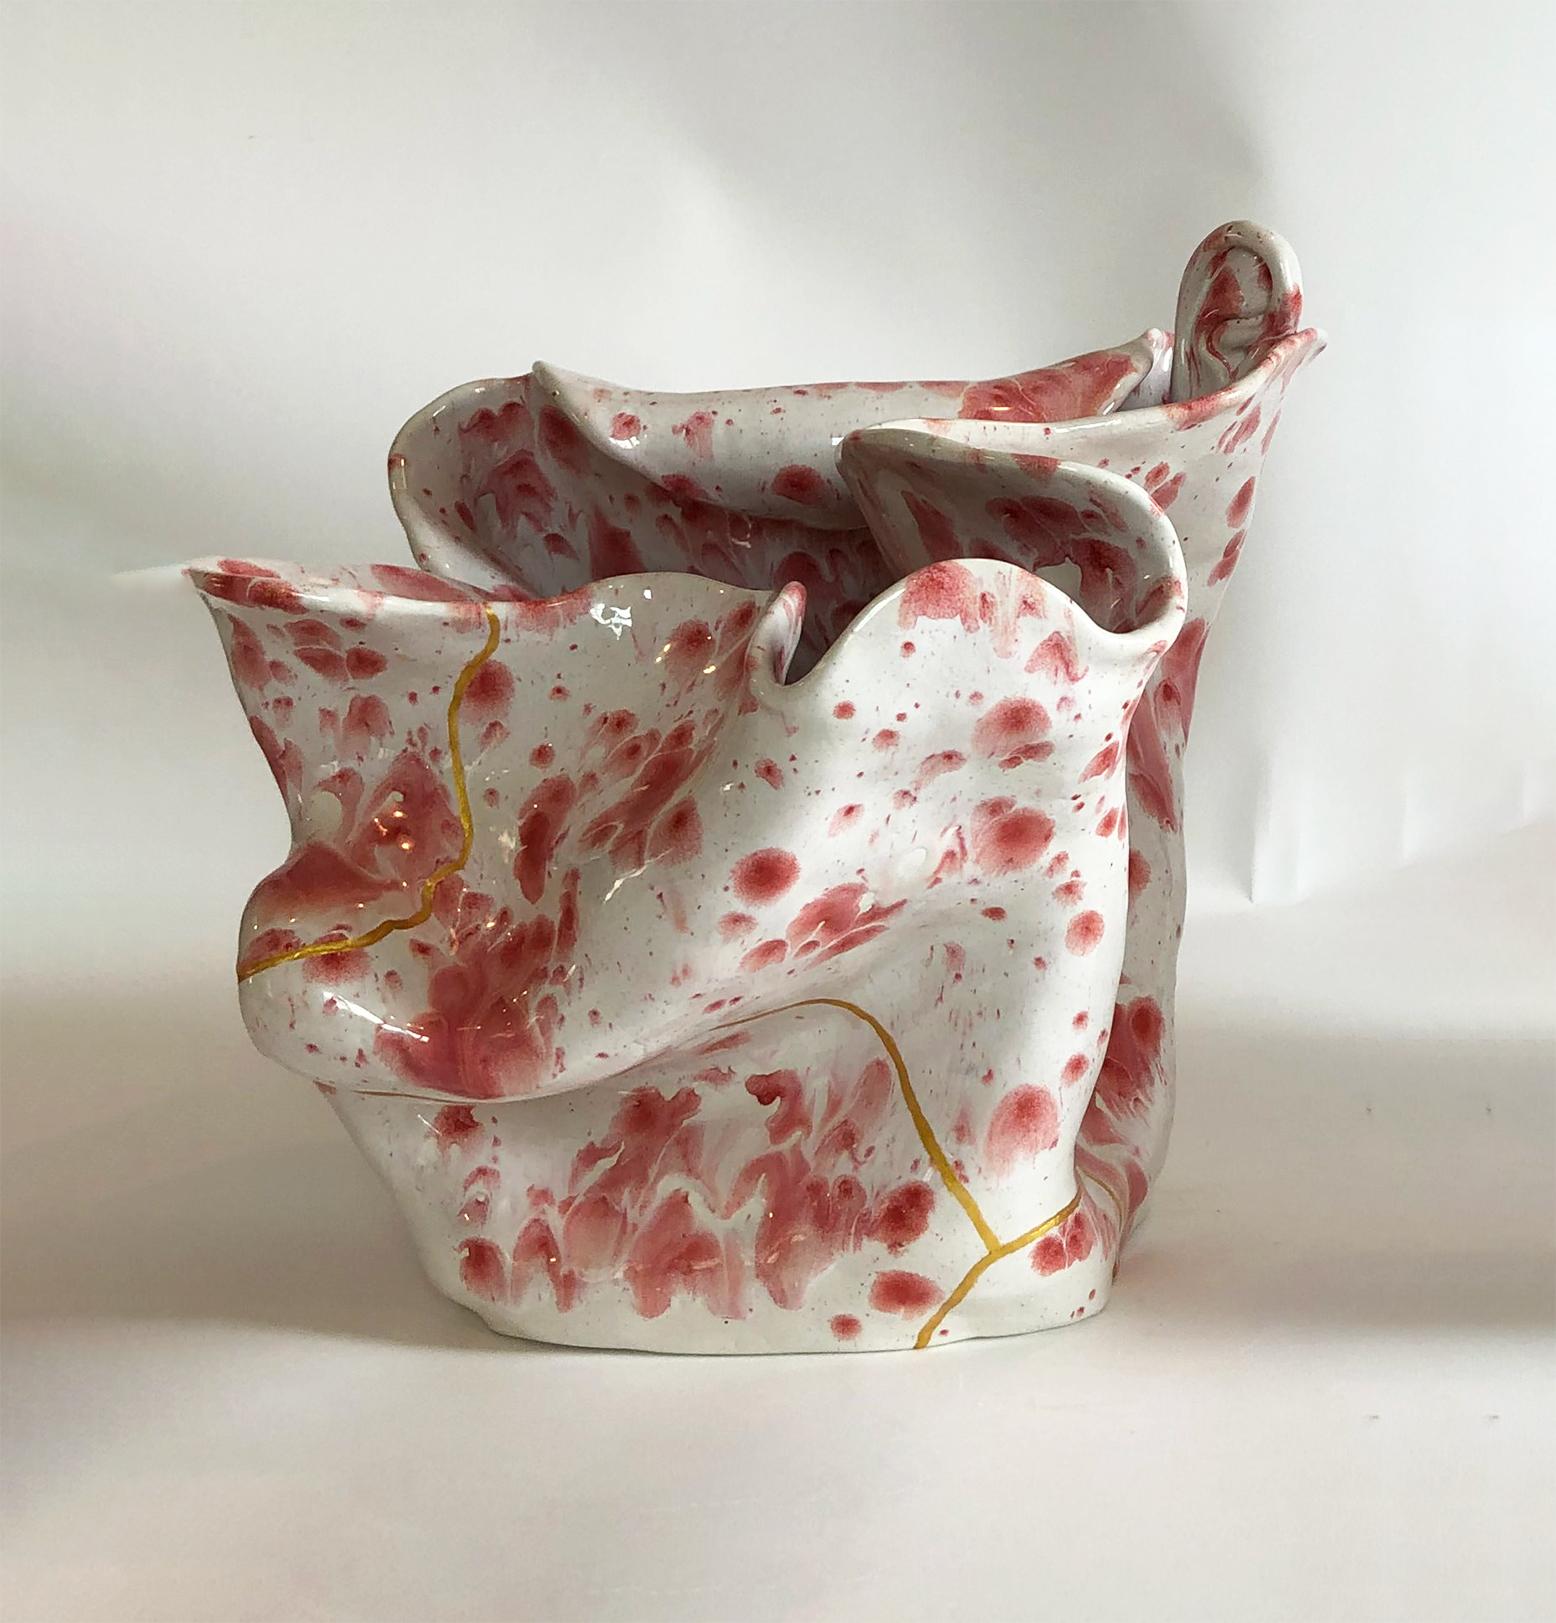 White visceral crawling glaze with 2 ear/ with a gold Kintsugi Japanese technique by Magda von Hanau
From The Visceral sculpture Series
Porcelain, clay sculpture with art glass glaze
Dimensions: 33 H x 36 x 33 cm 
One of a kind 

